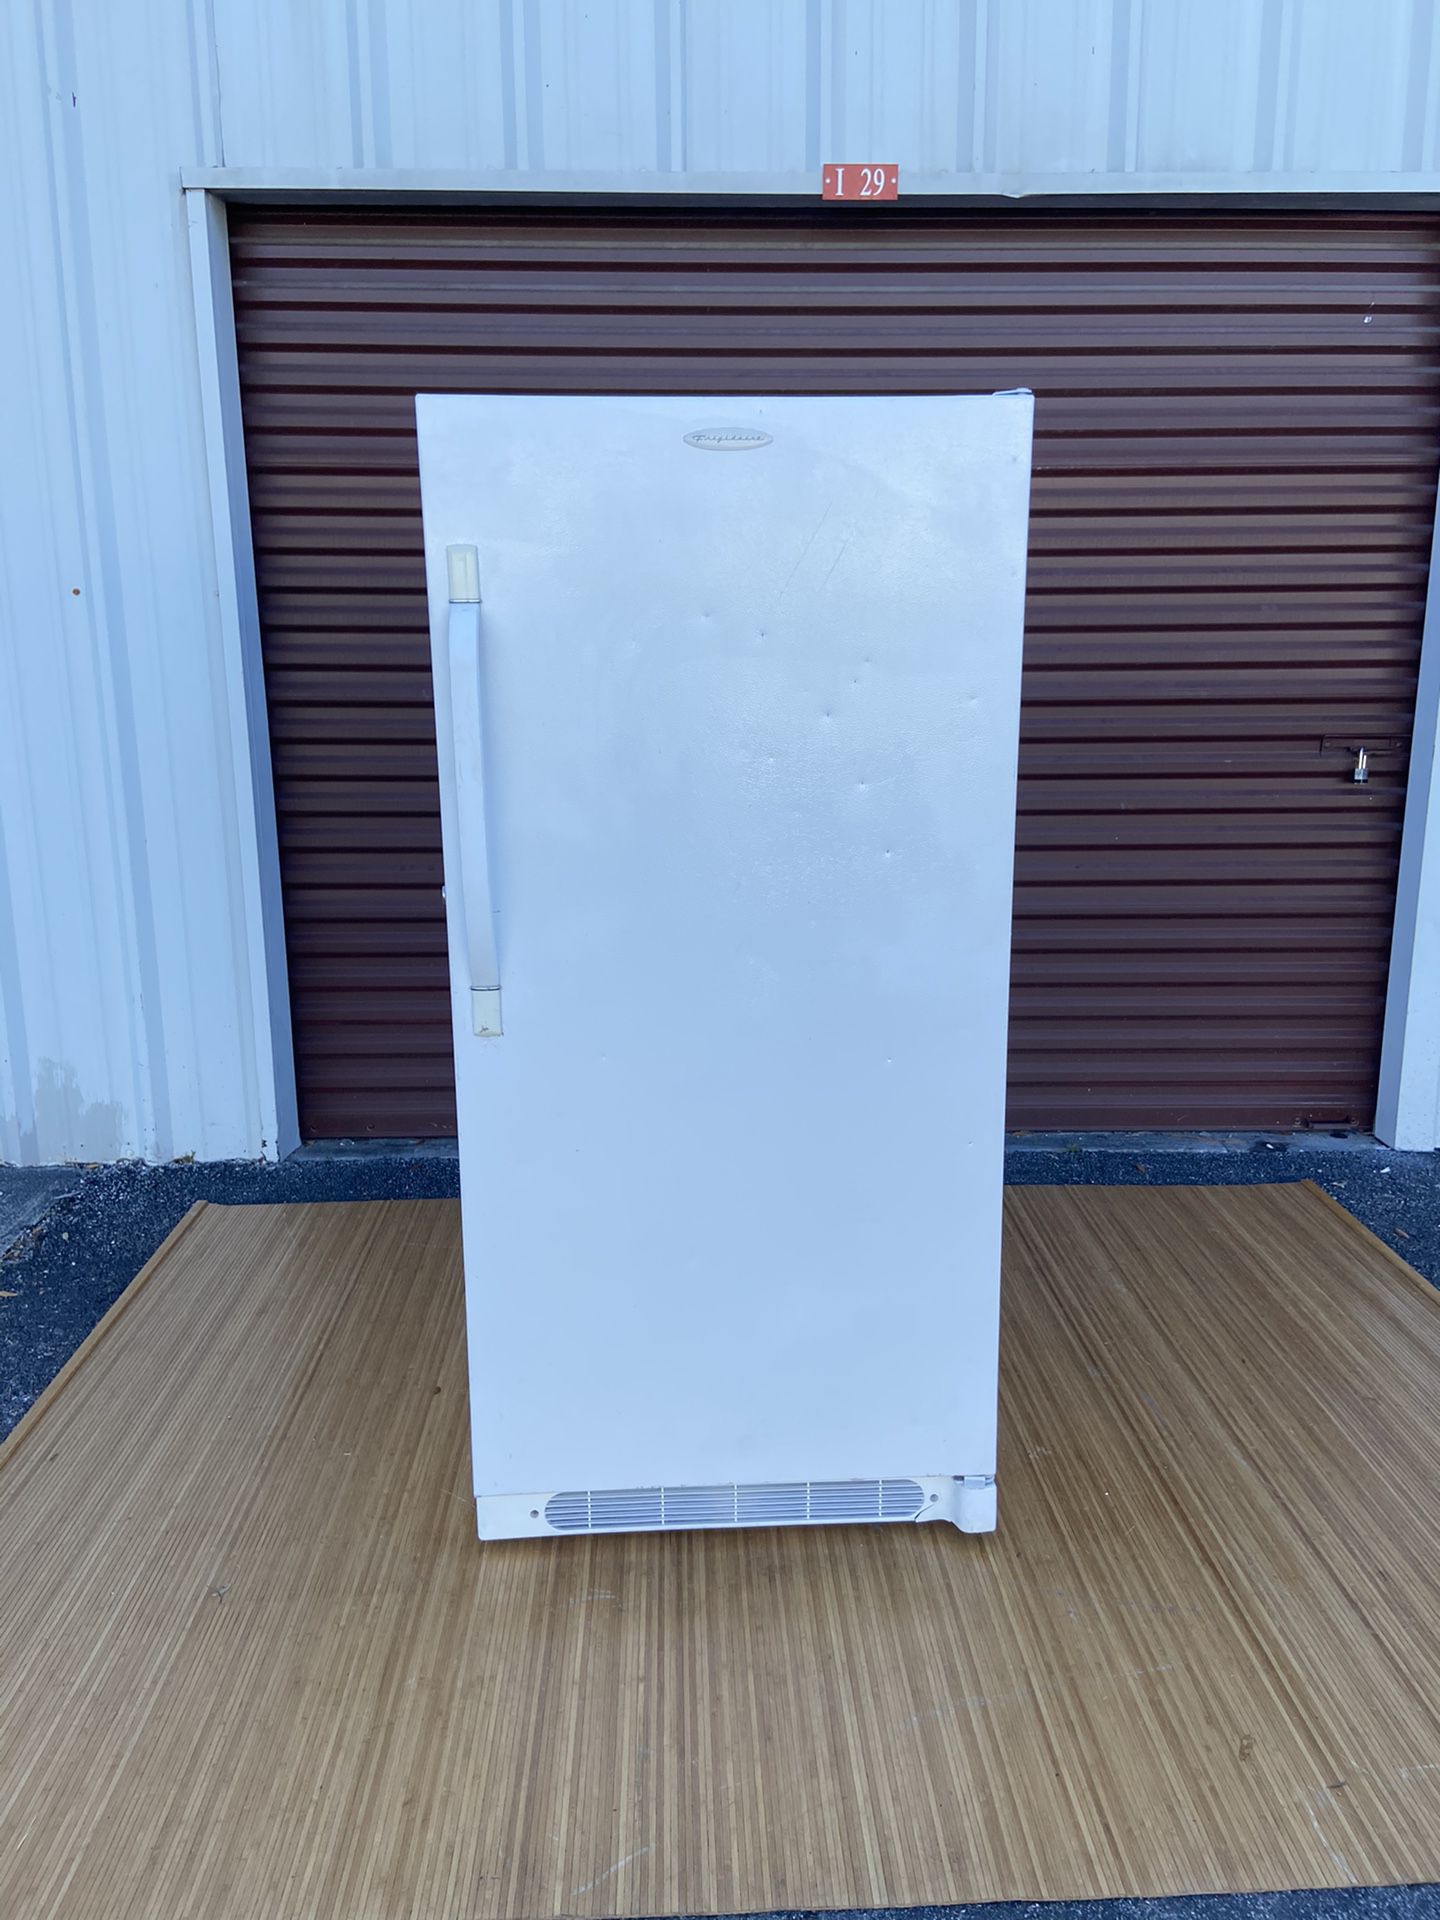 Frigidaire 14 Cu ft Manual Defrost Commercial Upright Freezer (Works Excellent) $425// Delivery Available//